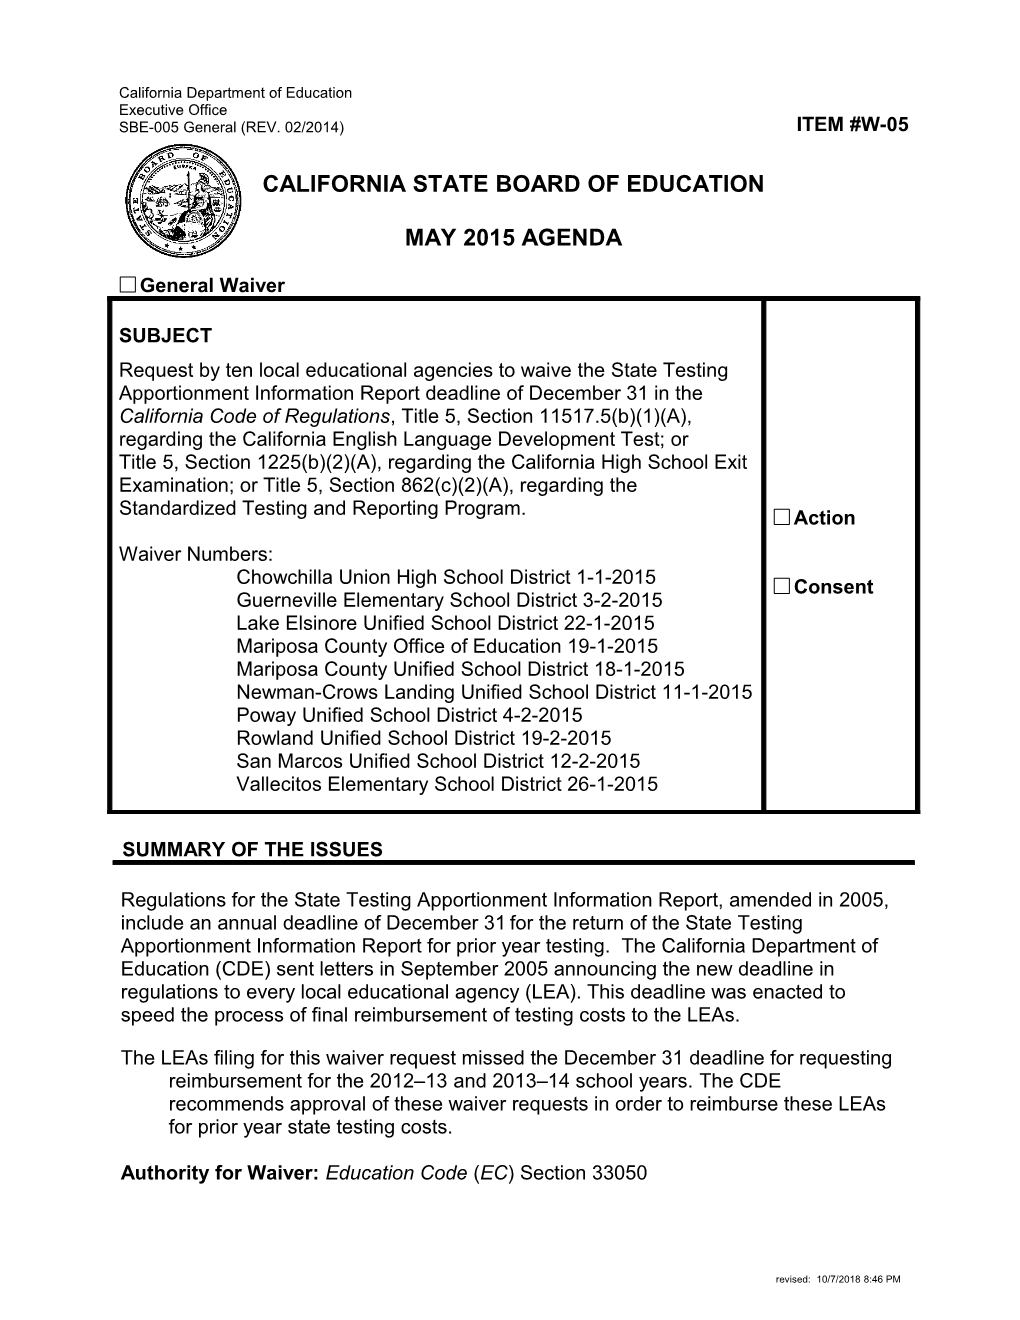 May 2015 Waiver Item W-05 - Meeting Agendas (CA State Board of Education)